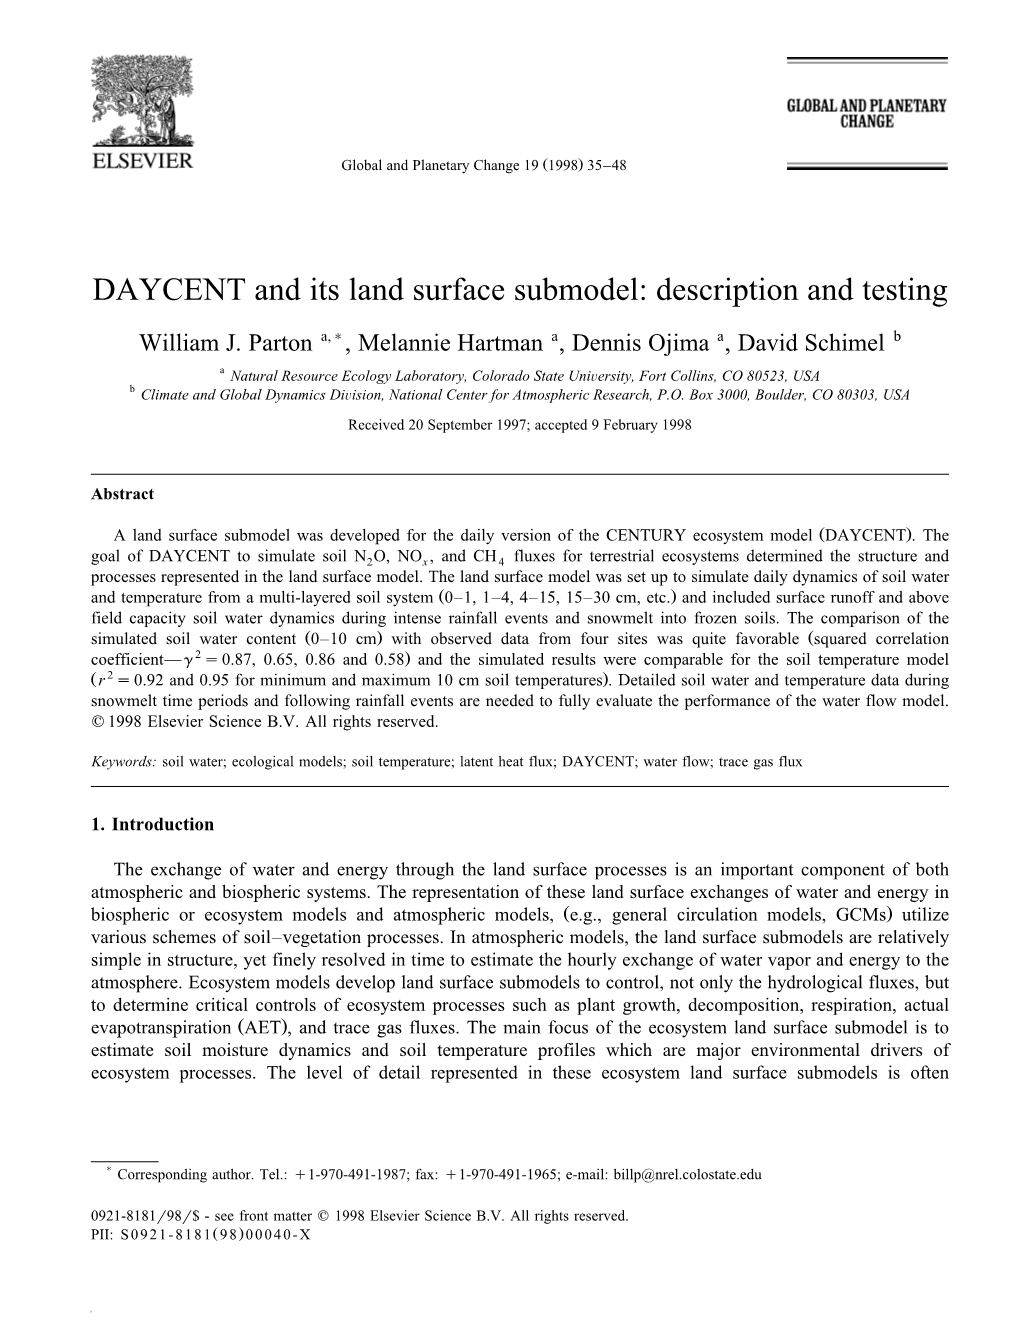 DAYCENT and Its Land Surface Submodel: Description and Testing